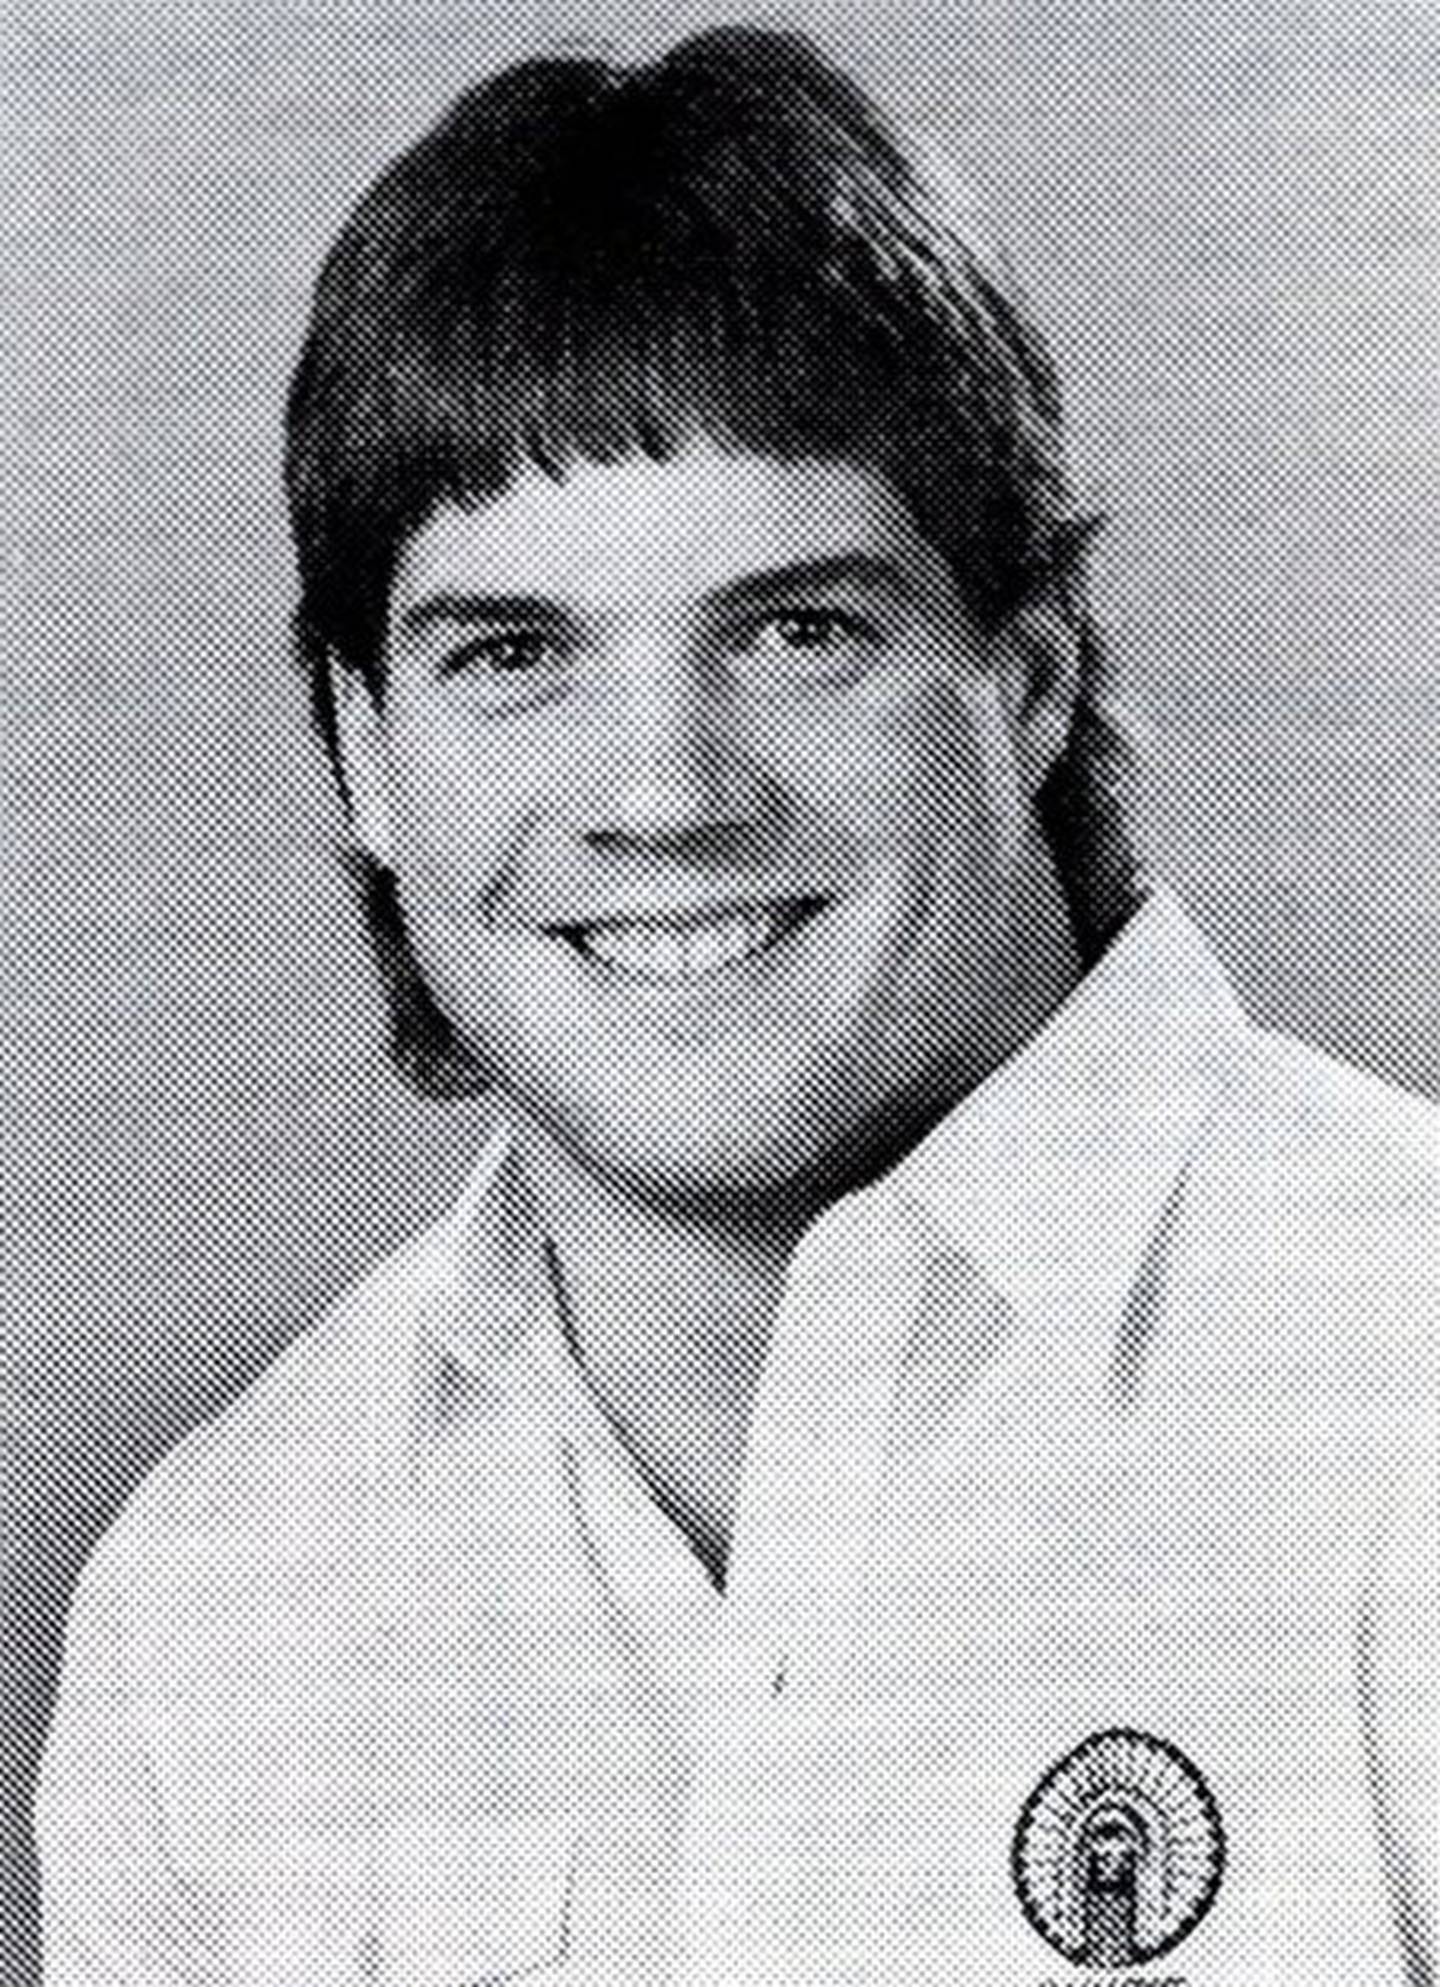 Walnut's Ron Bohm played for the University of Illinois from 1982-86.